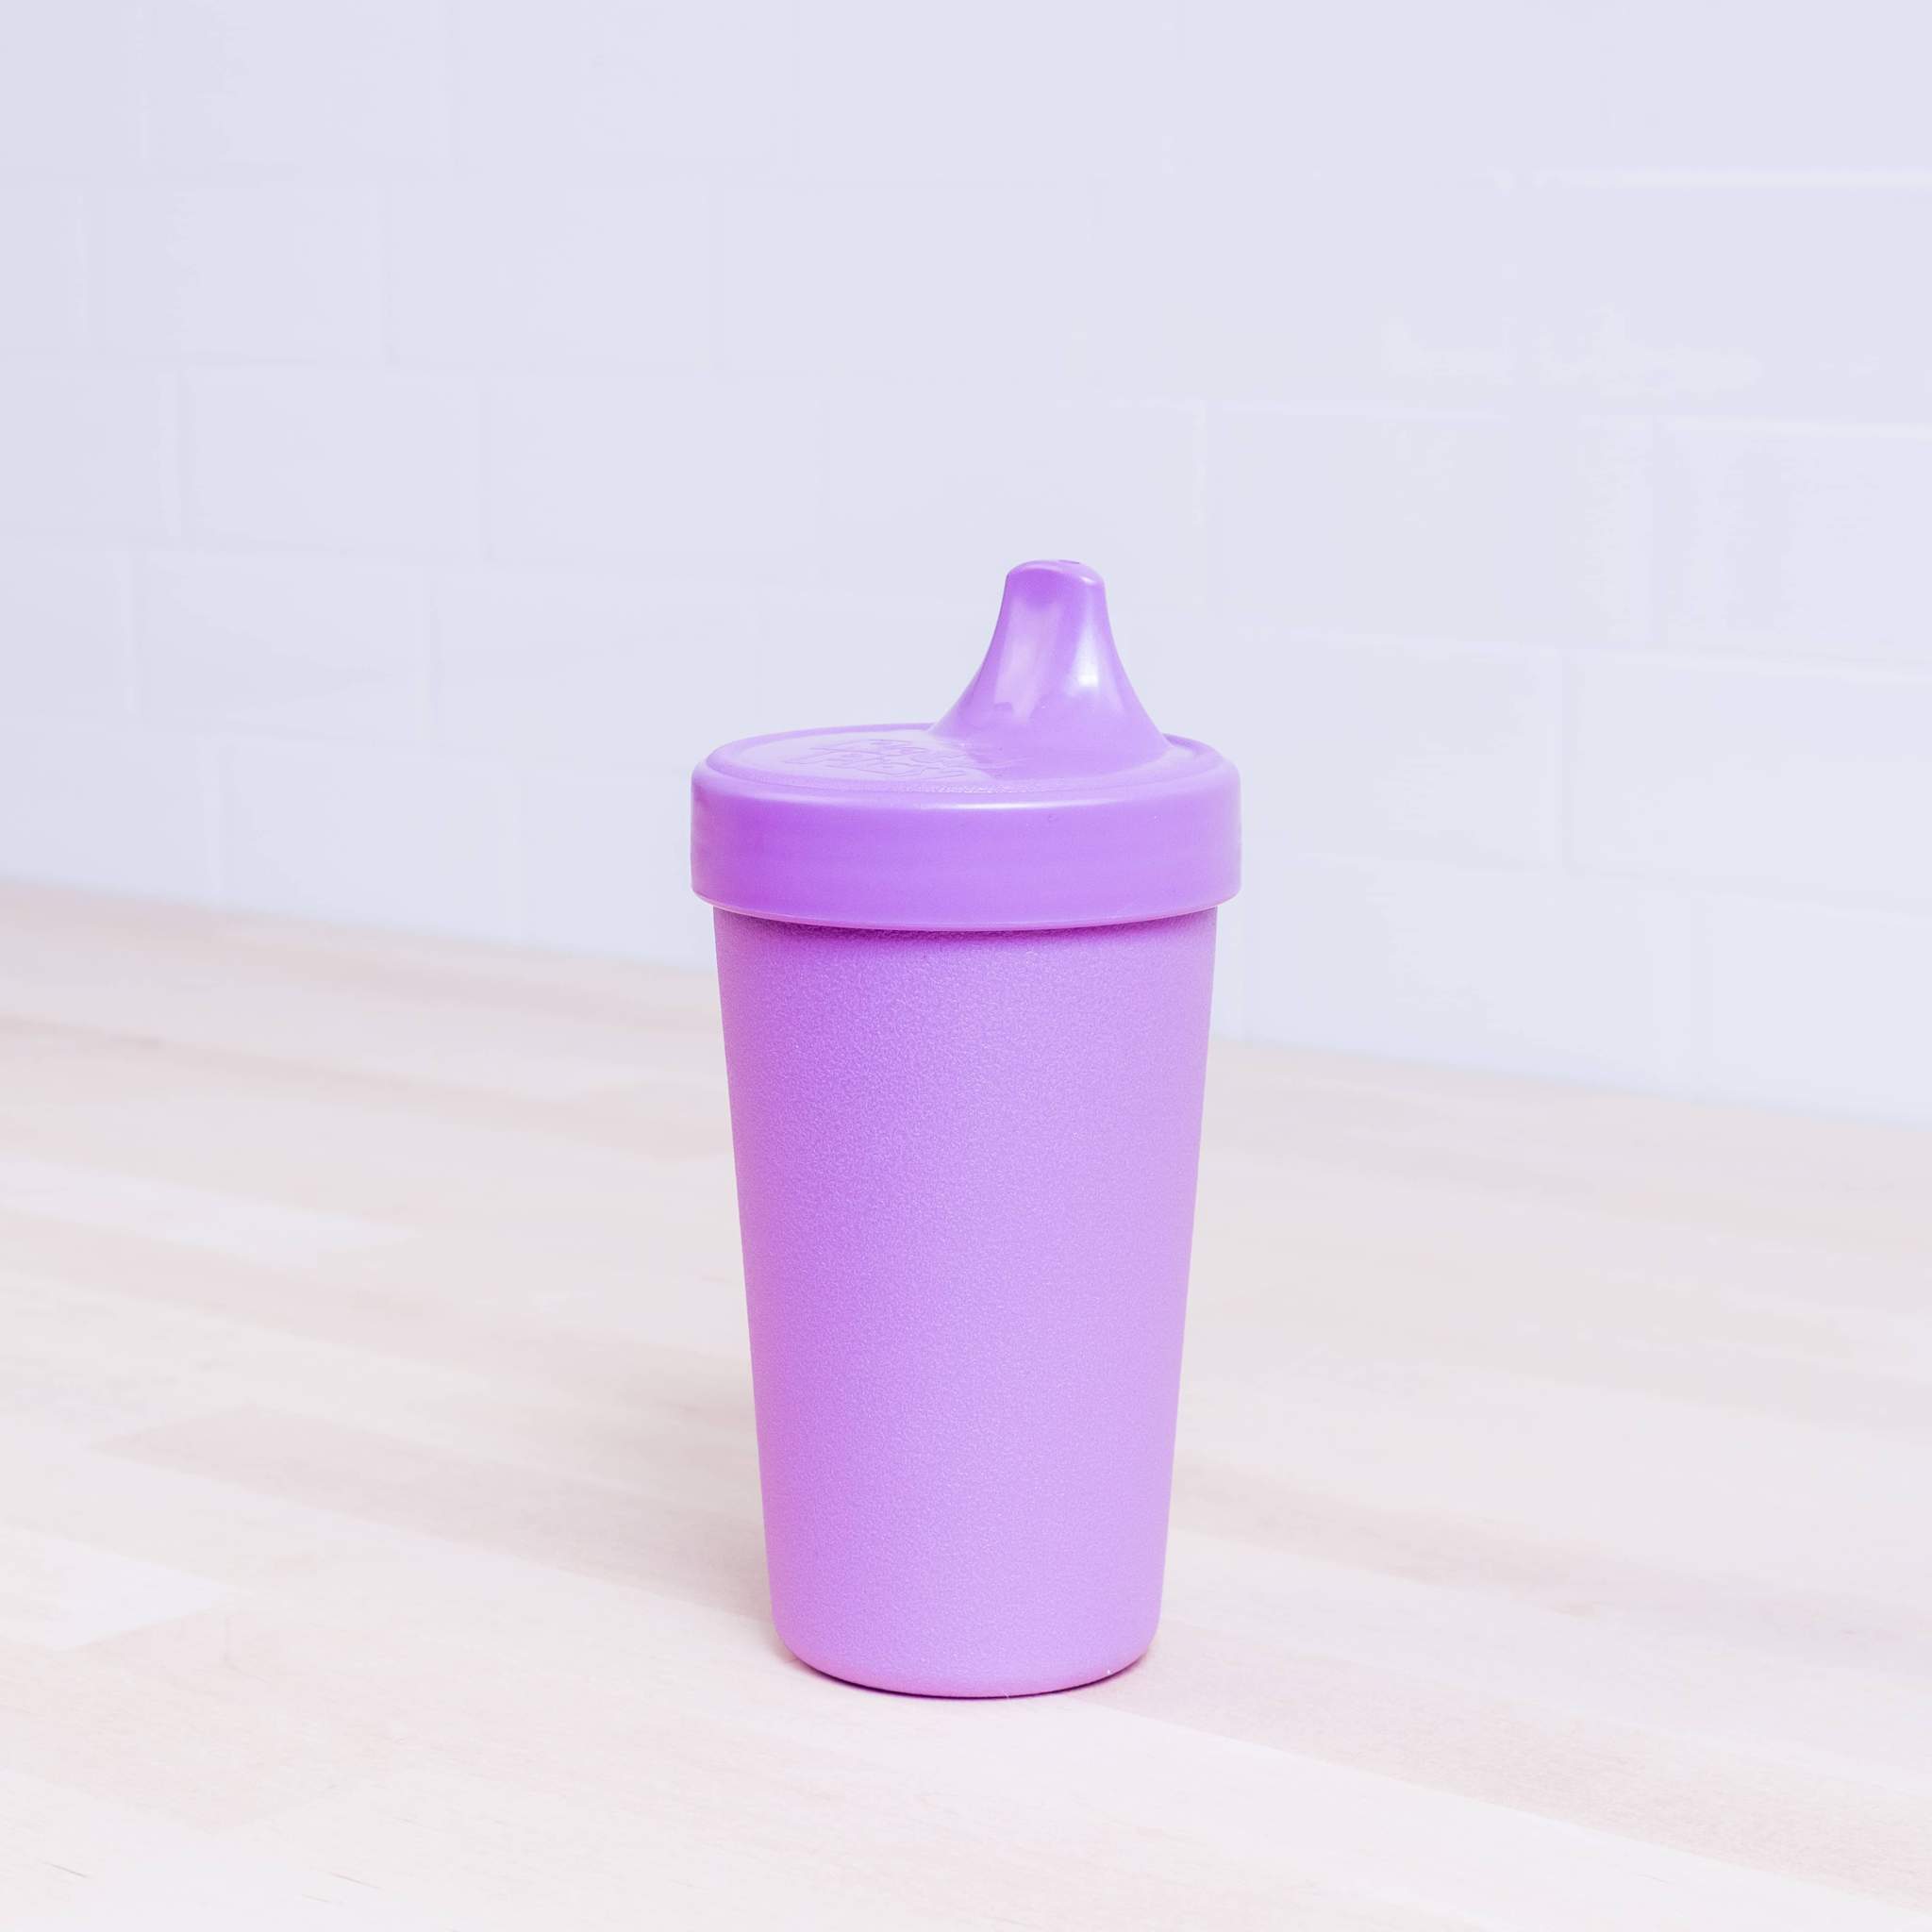 Re-Play Princess No-Spill Sippy Cup